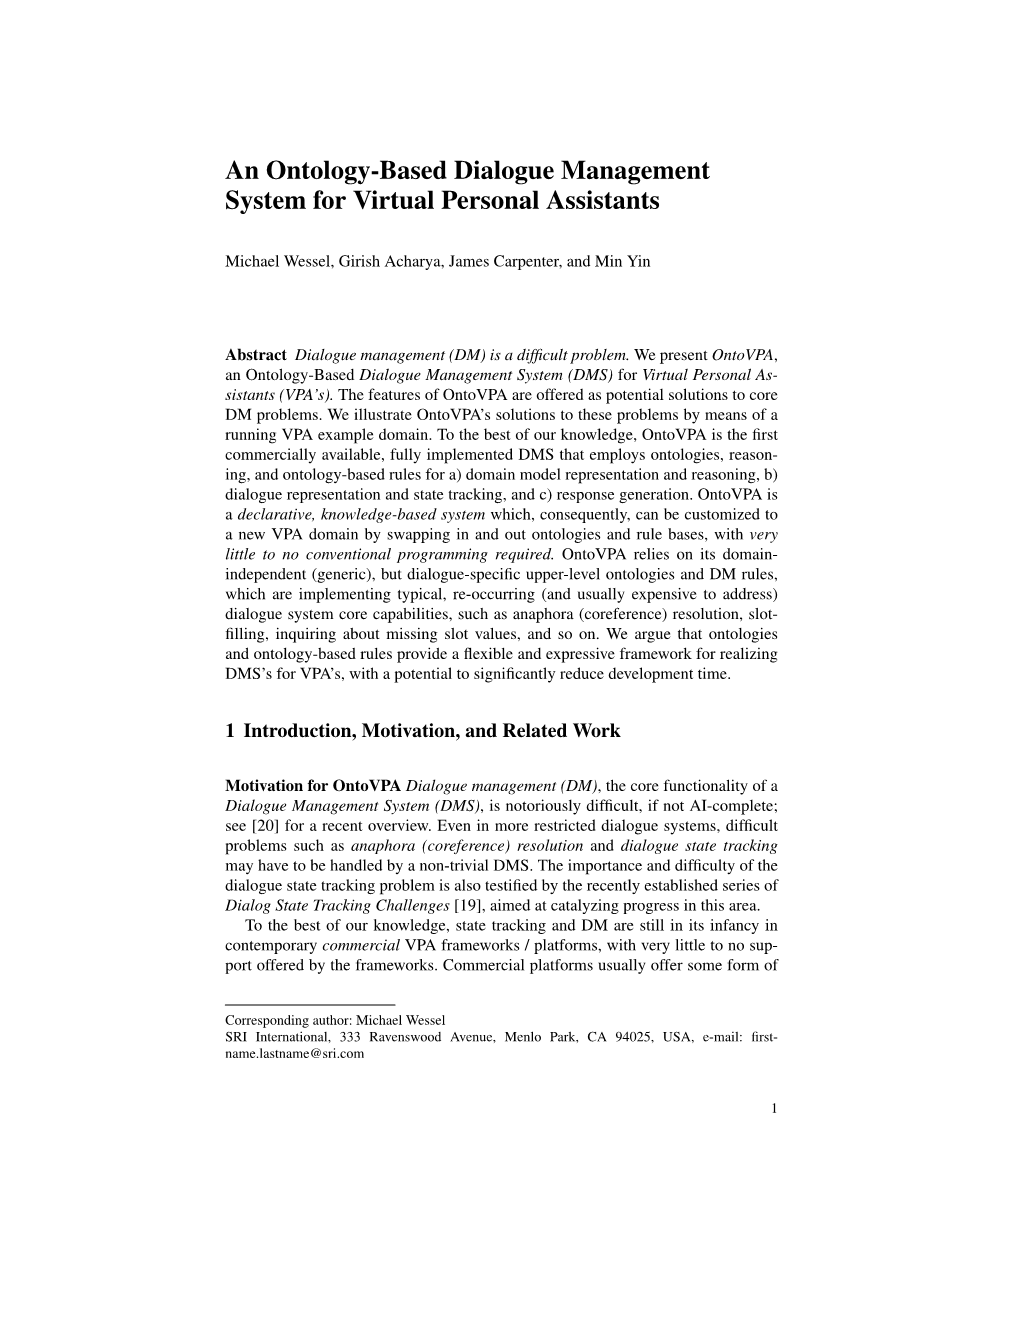 An Ontology-Based Dialogue Management System for Virtual Personal Assistants